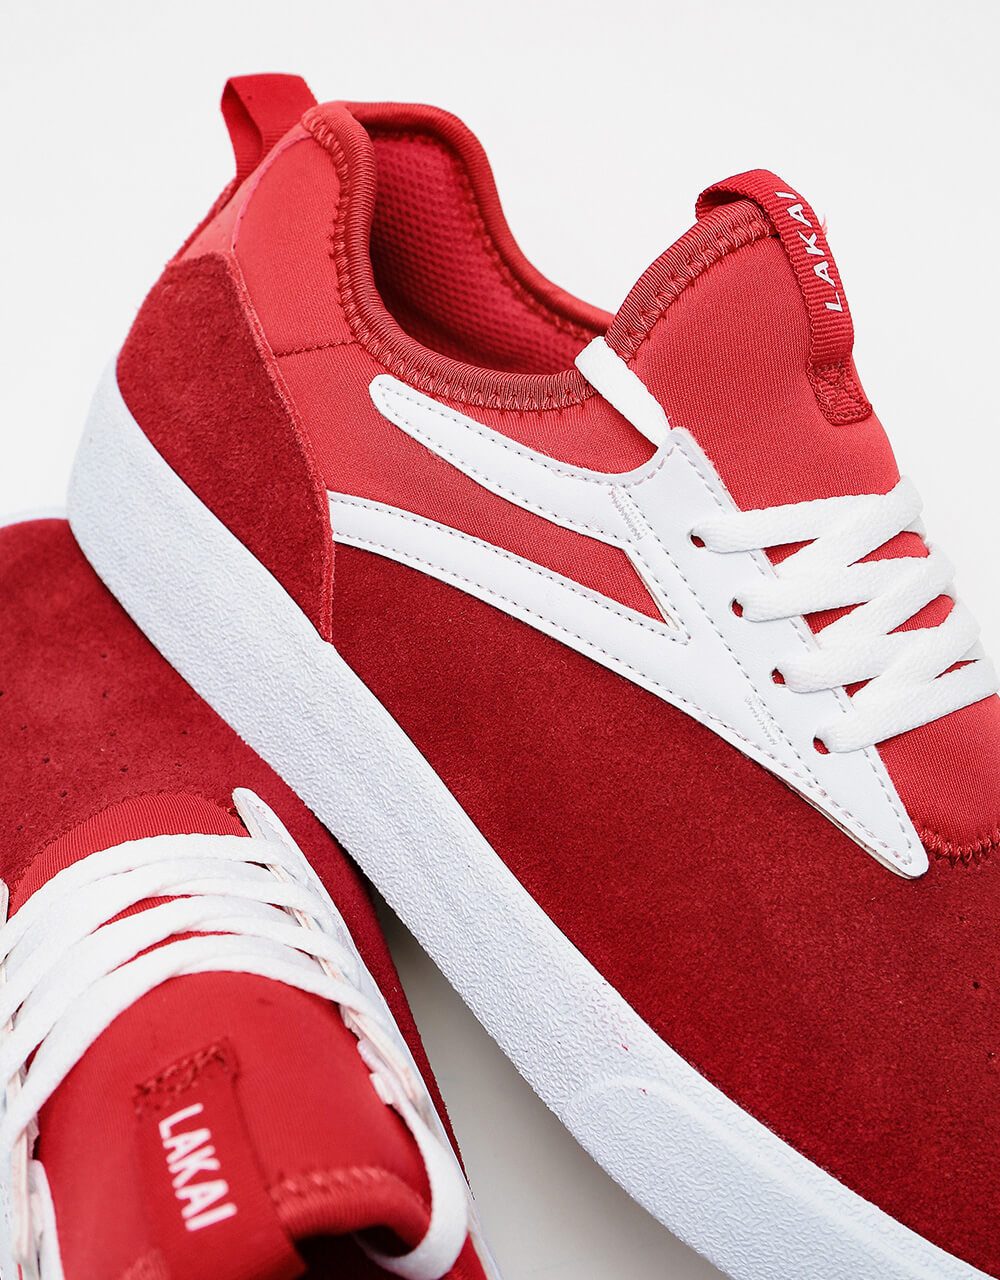 Lakai Dover Skate Shoes - Red Suede